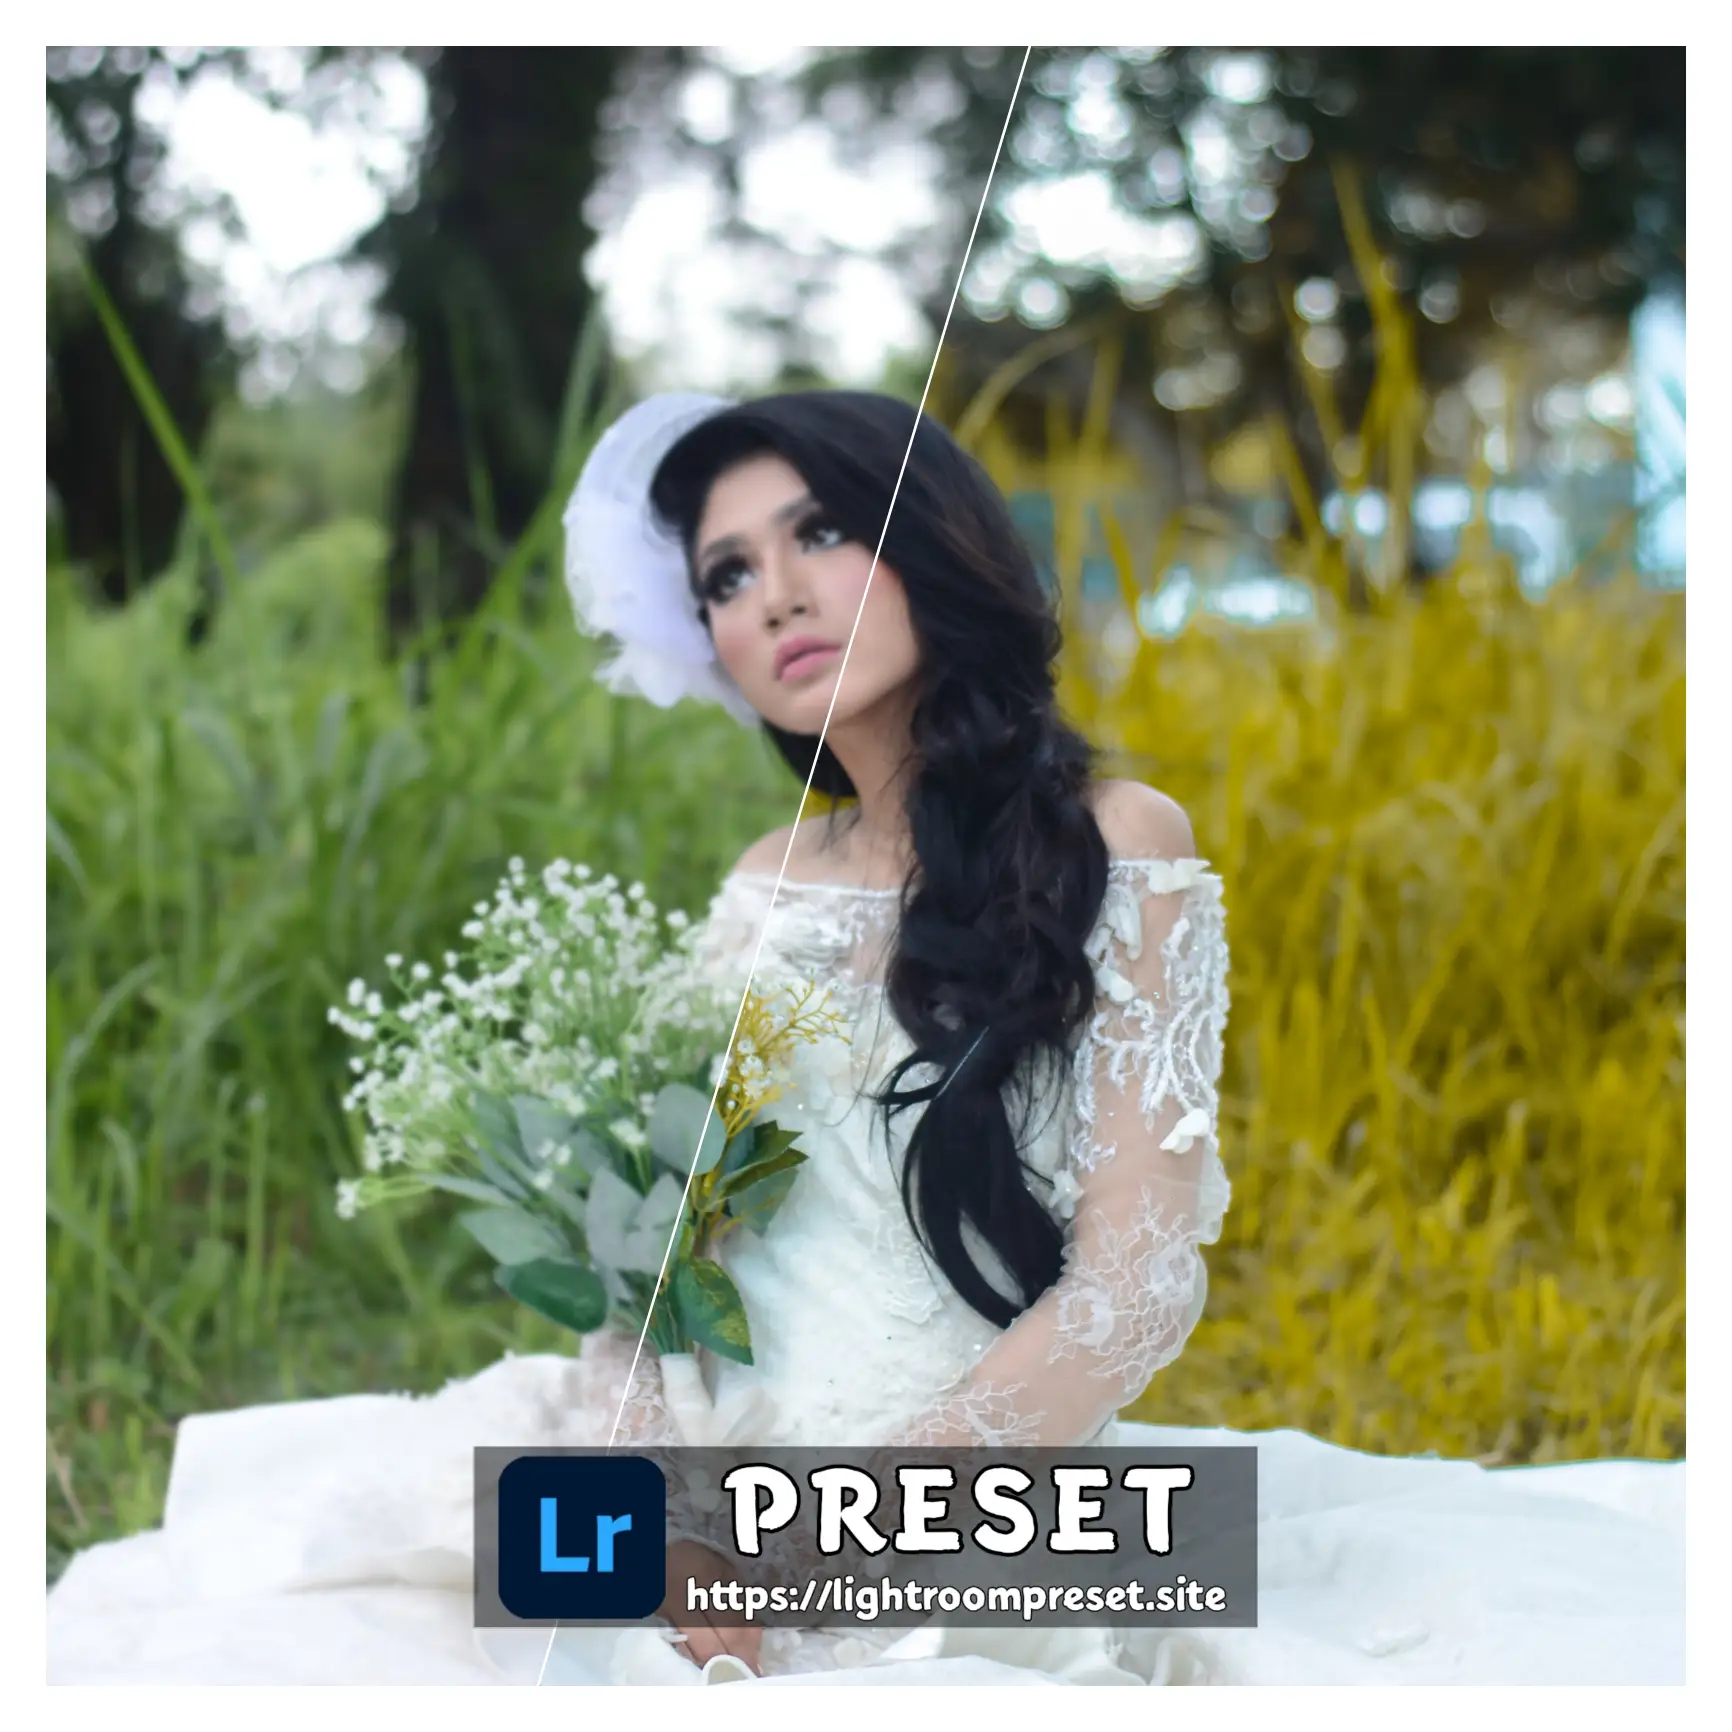 You are currently viewing Creativetacos mobile lightroom presets download free